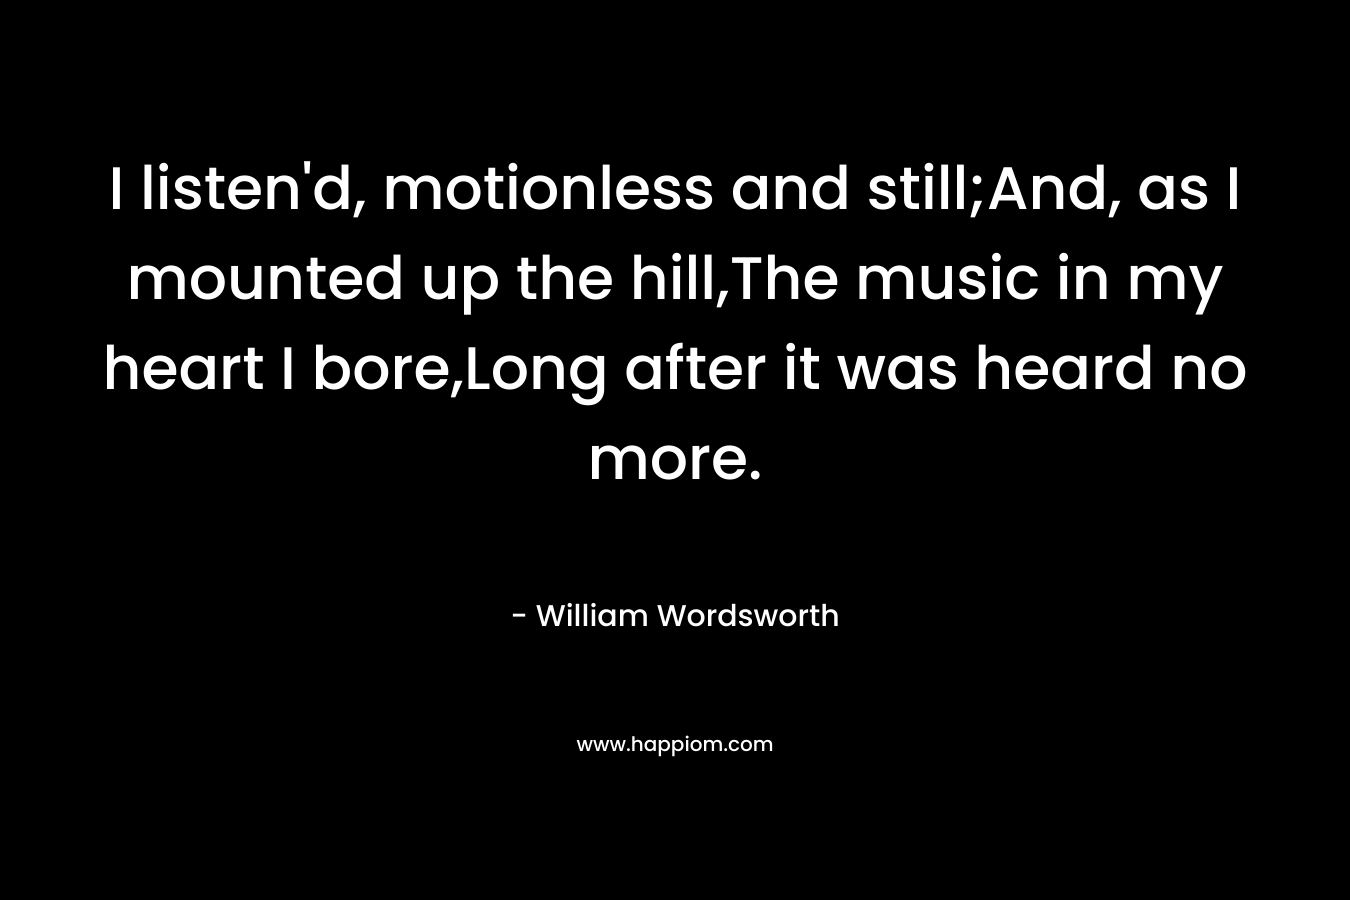 I listen'd, motionless and still;And, as I mounted up the hill,The music in my heart I bore,Long after it was heard no more.